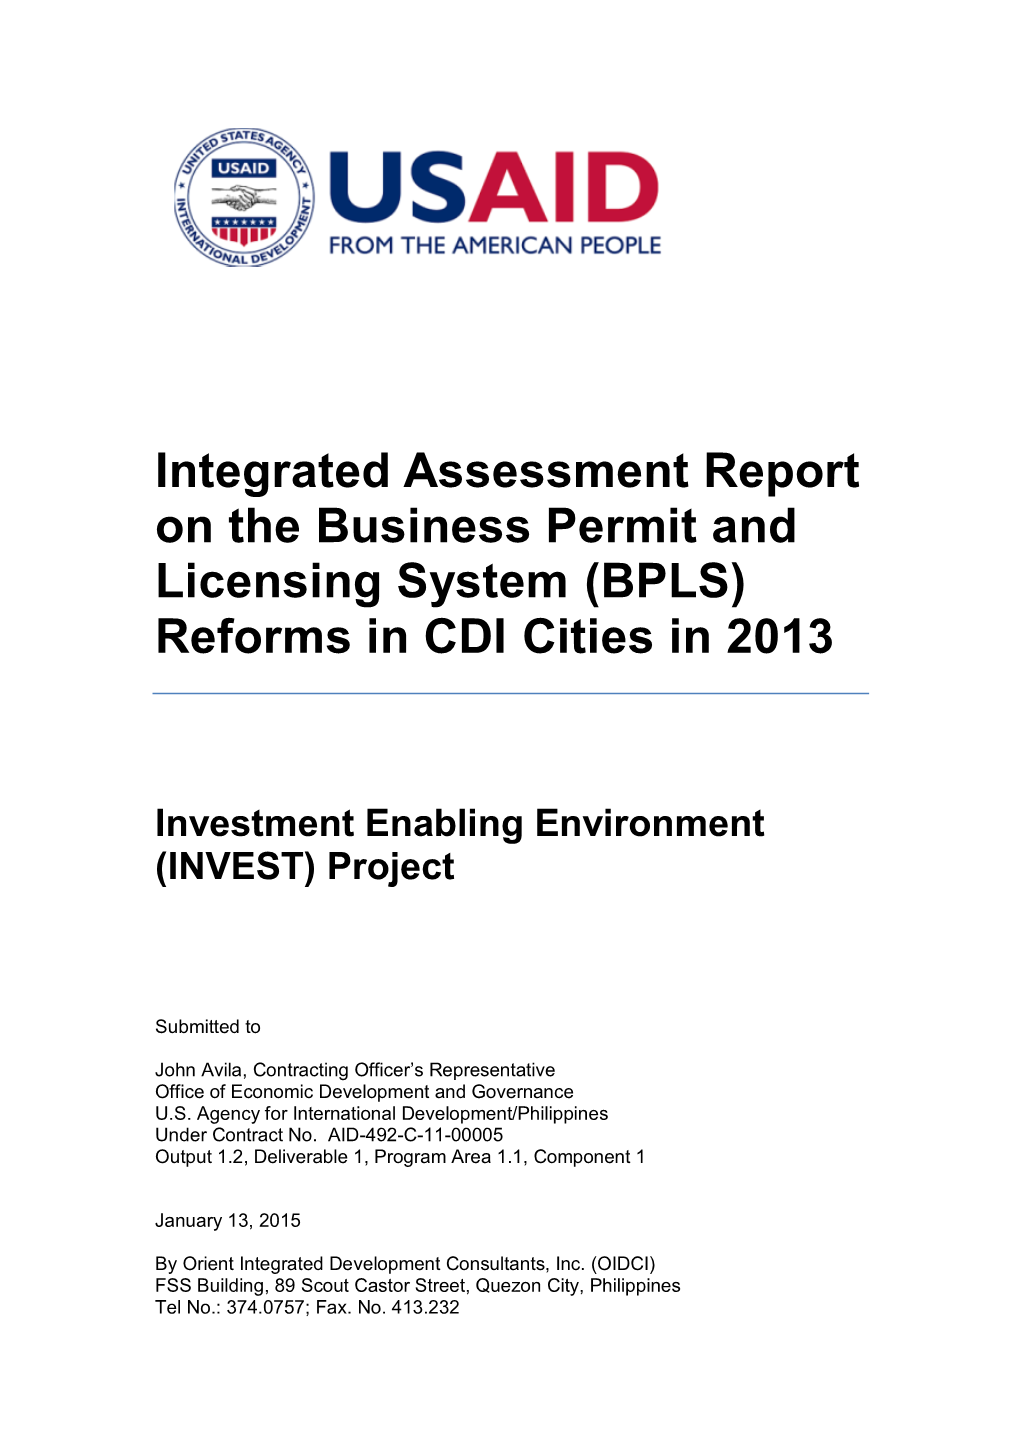 (BPLS) Reforms in CDI Cities in 2013